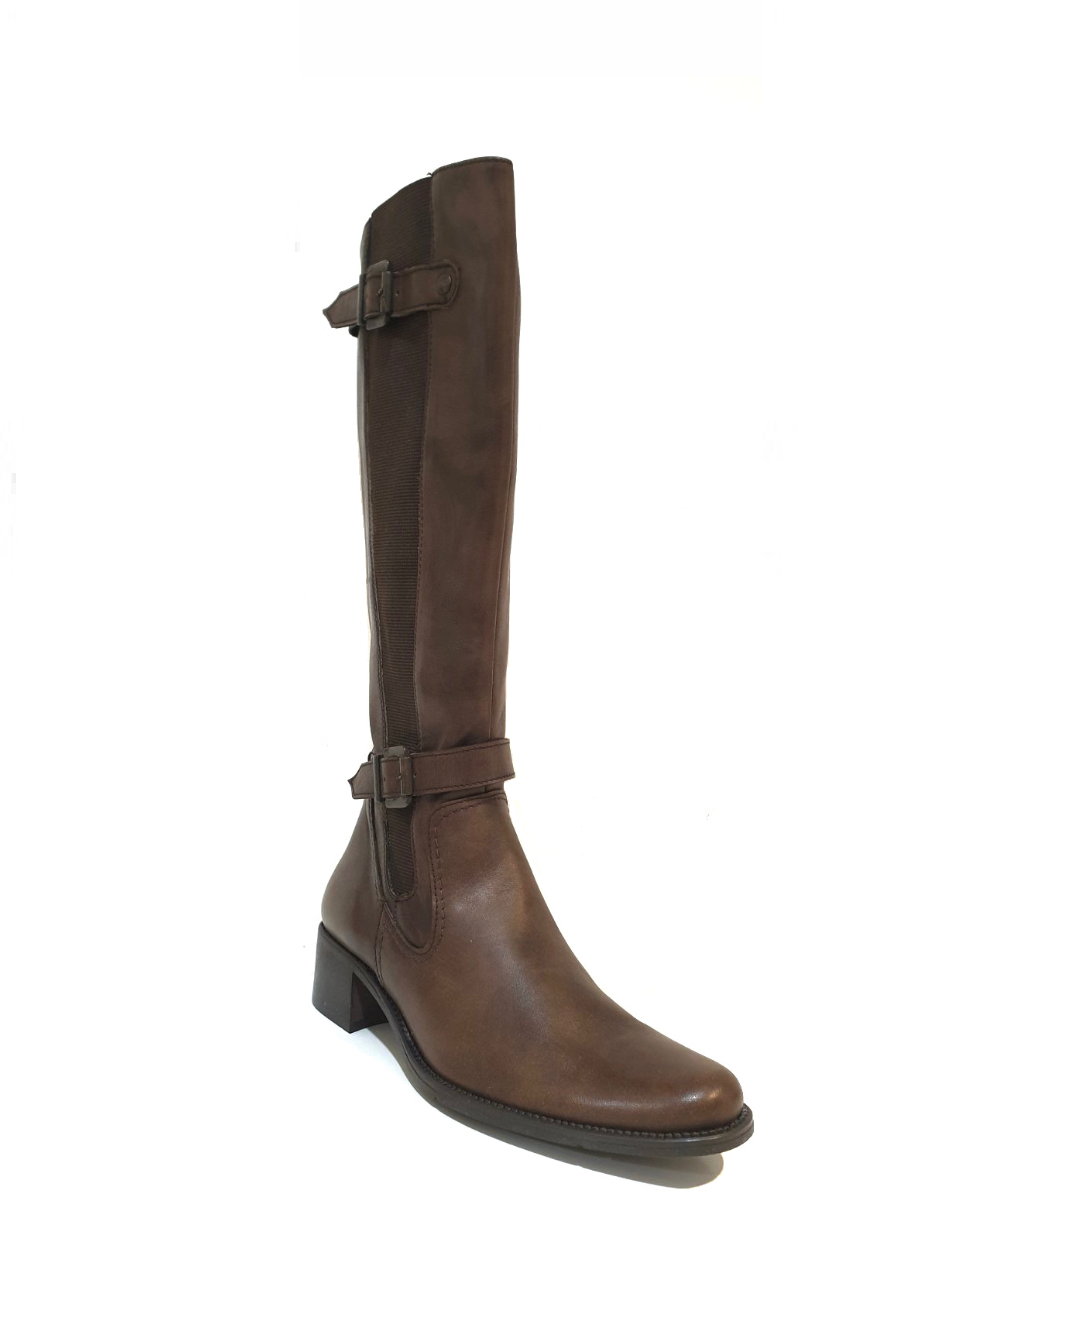 Old Florence 26071 Tamponato Taupe Brown Zip Knee High Boot Made In Italy